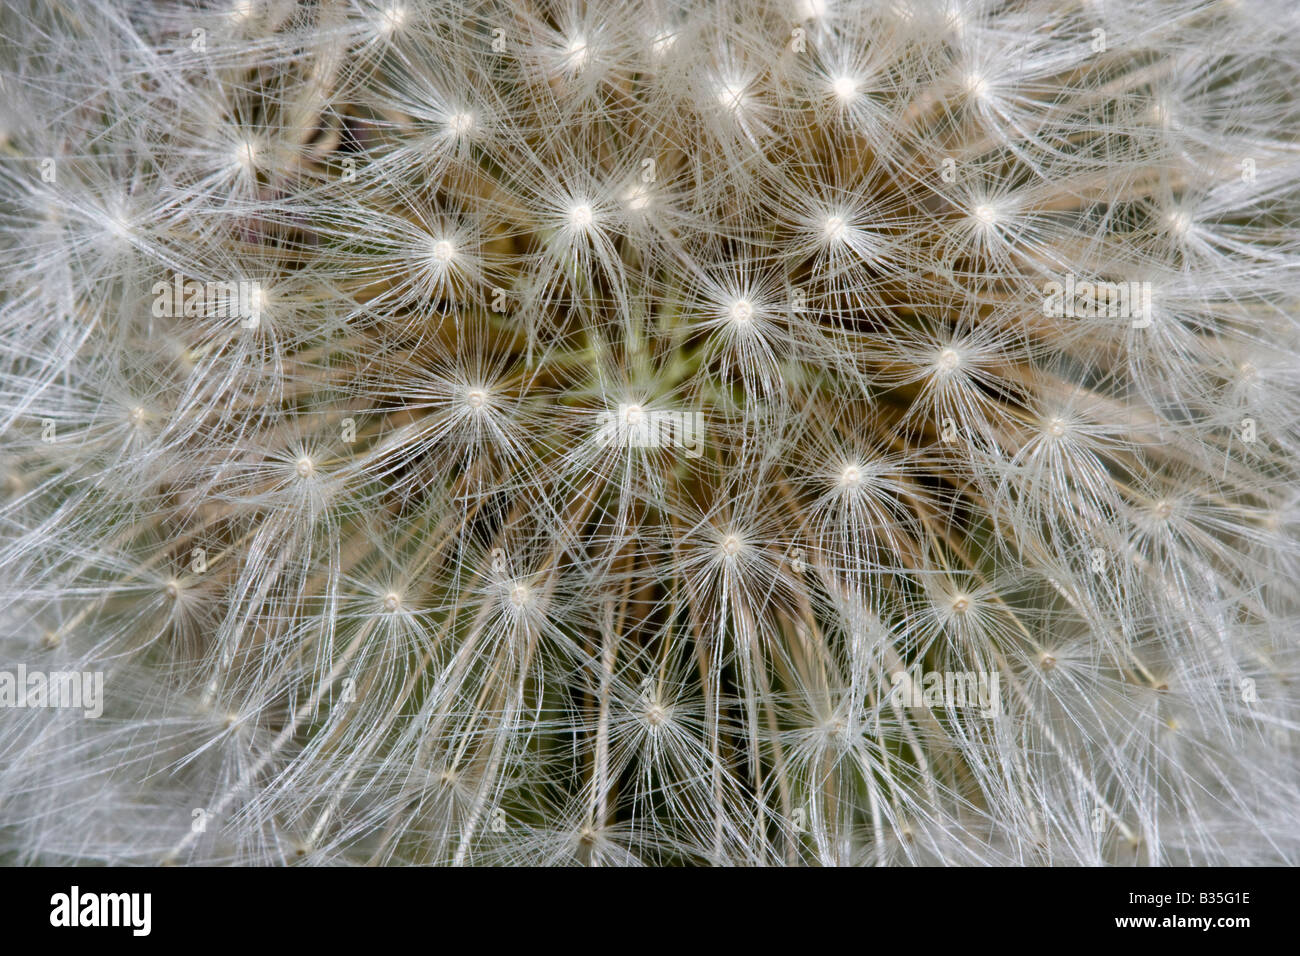 Common Dandelion (Taraxacum officinale), macro close up of the furry achenes, seed heads forming abstract patten. Stock Photo